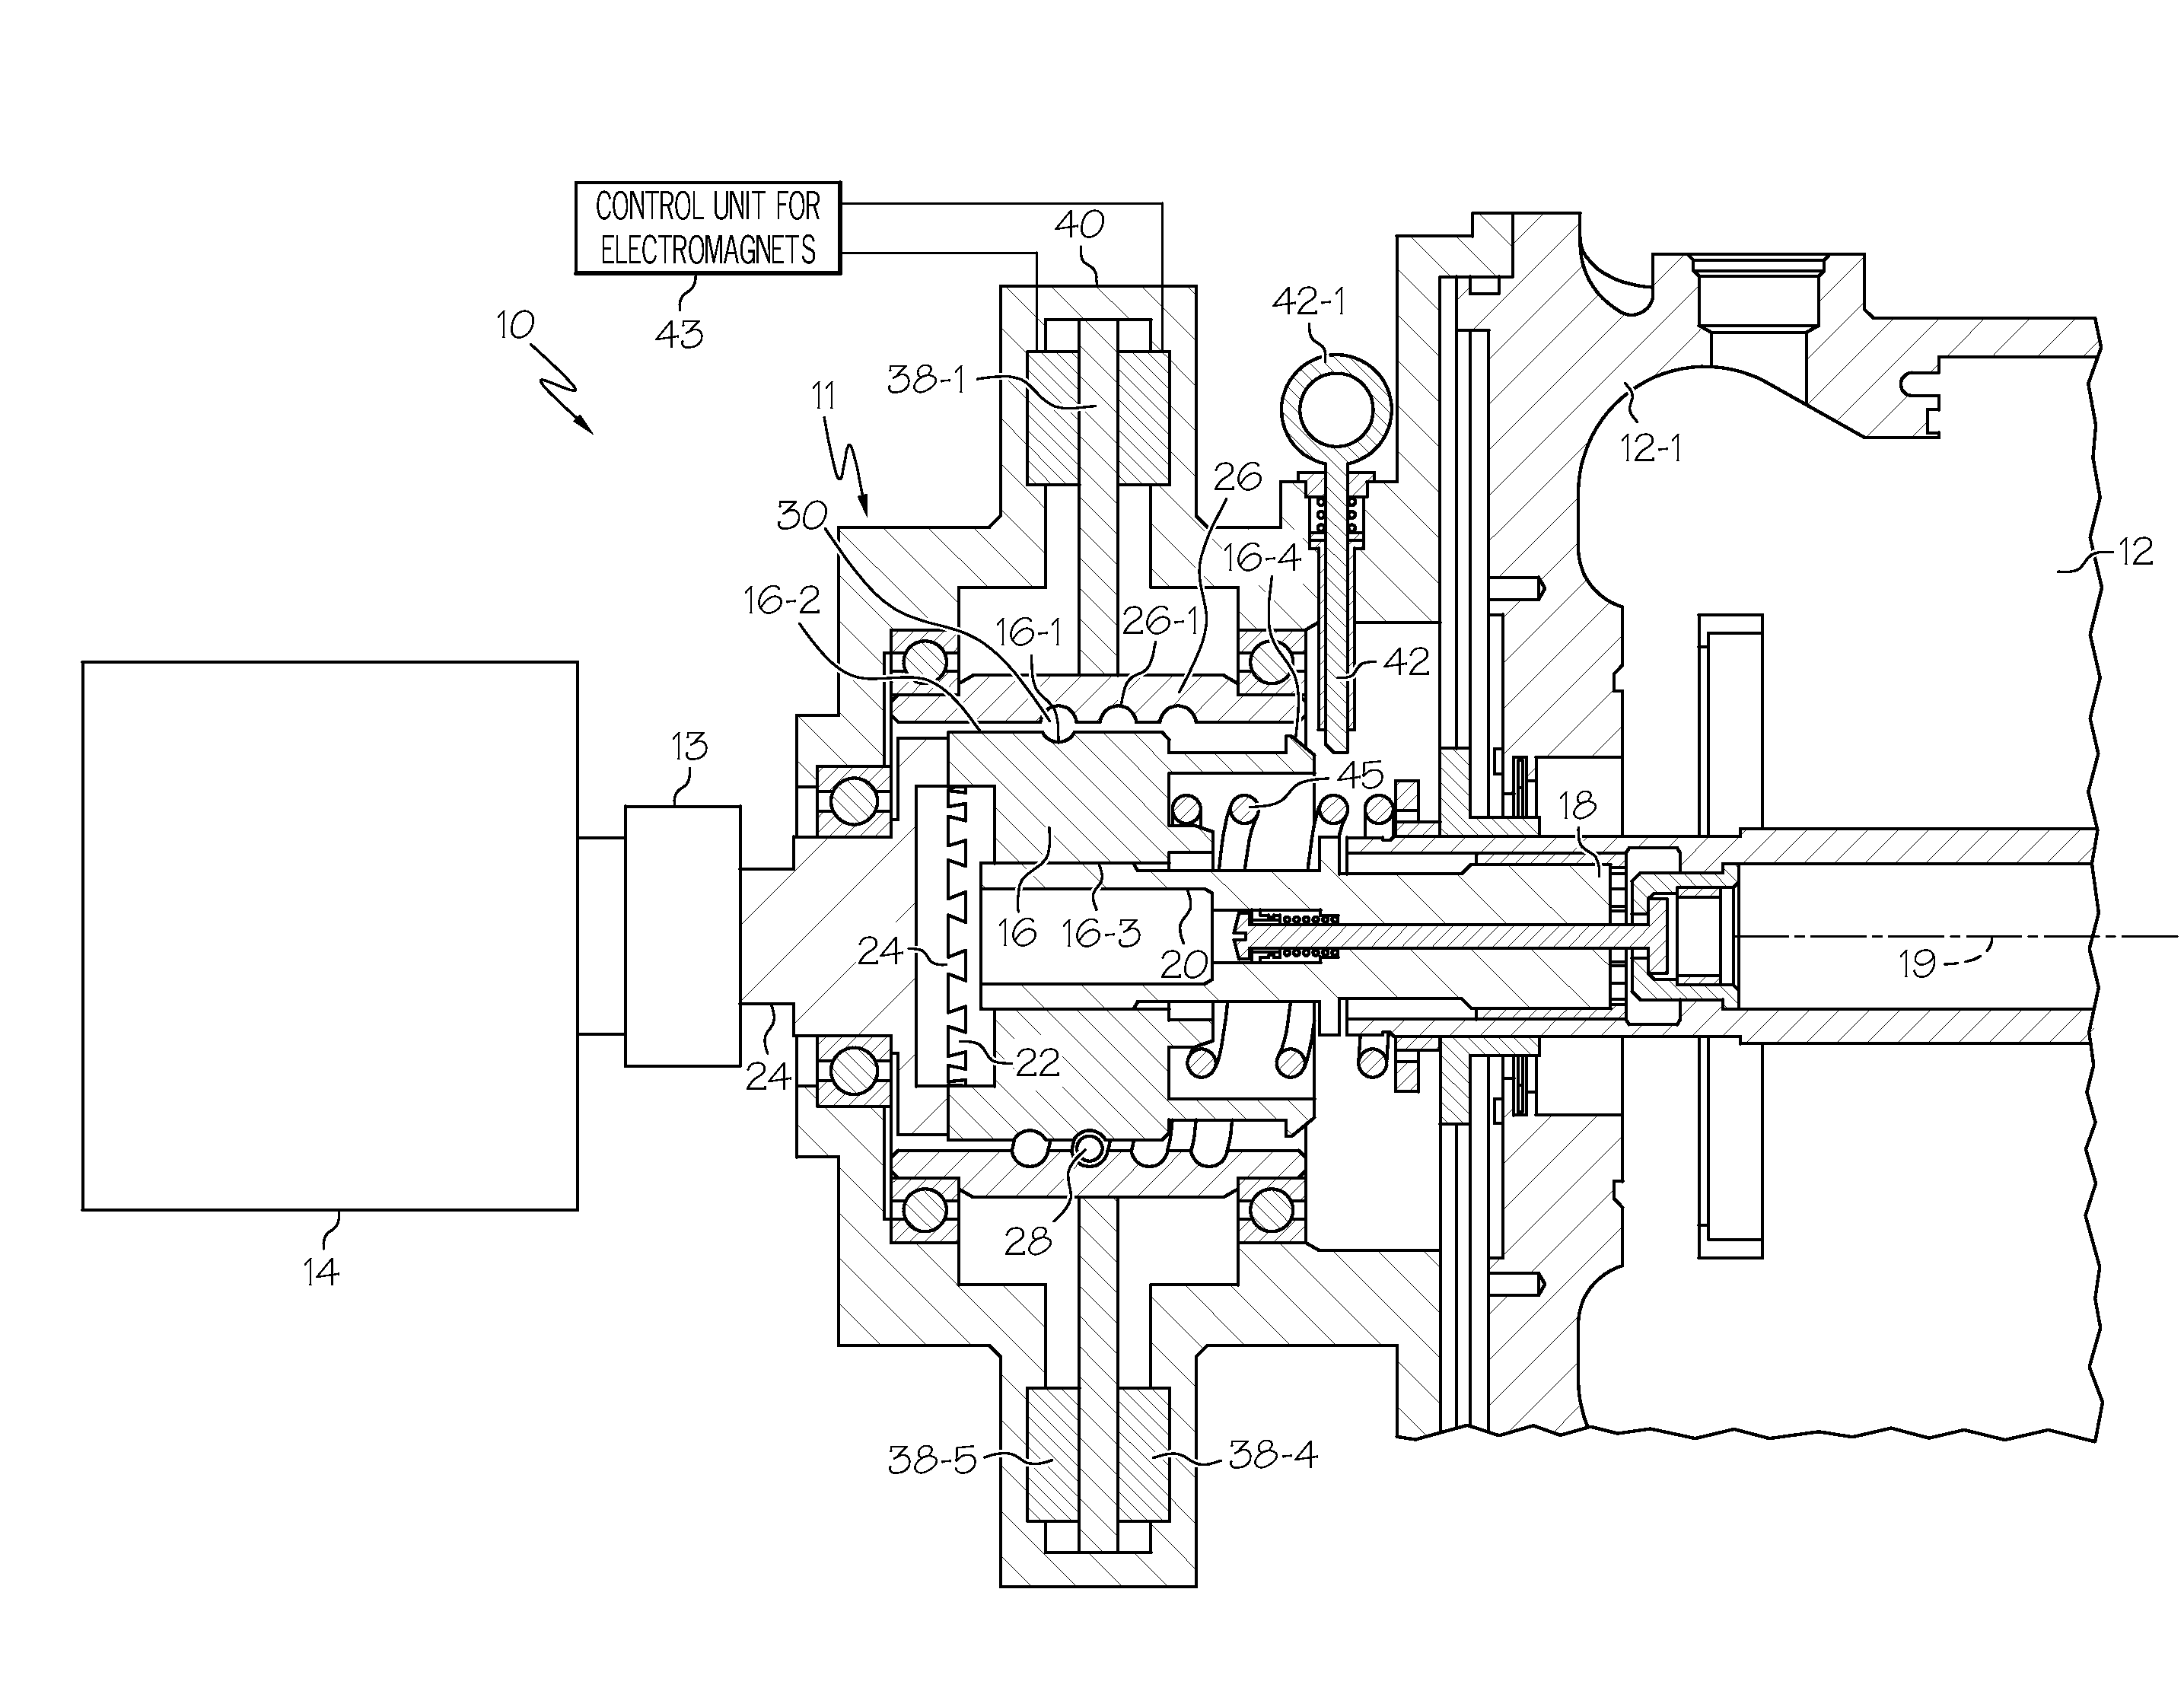 Application of eddy current braking system for use in a gearbox/generator mechanical disconnect